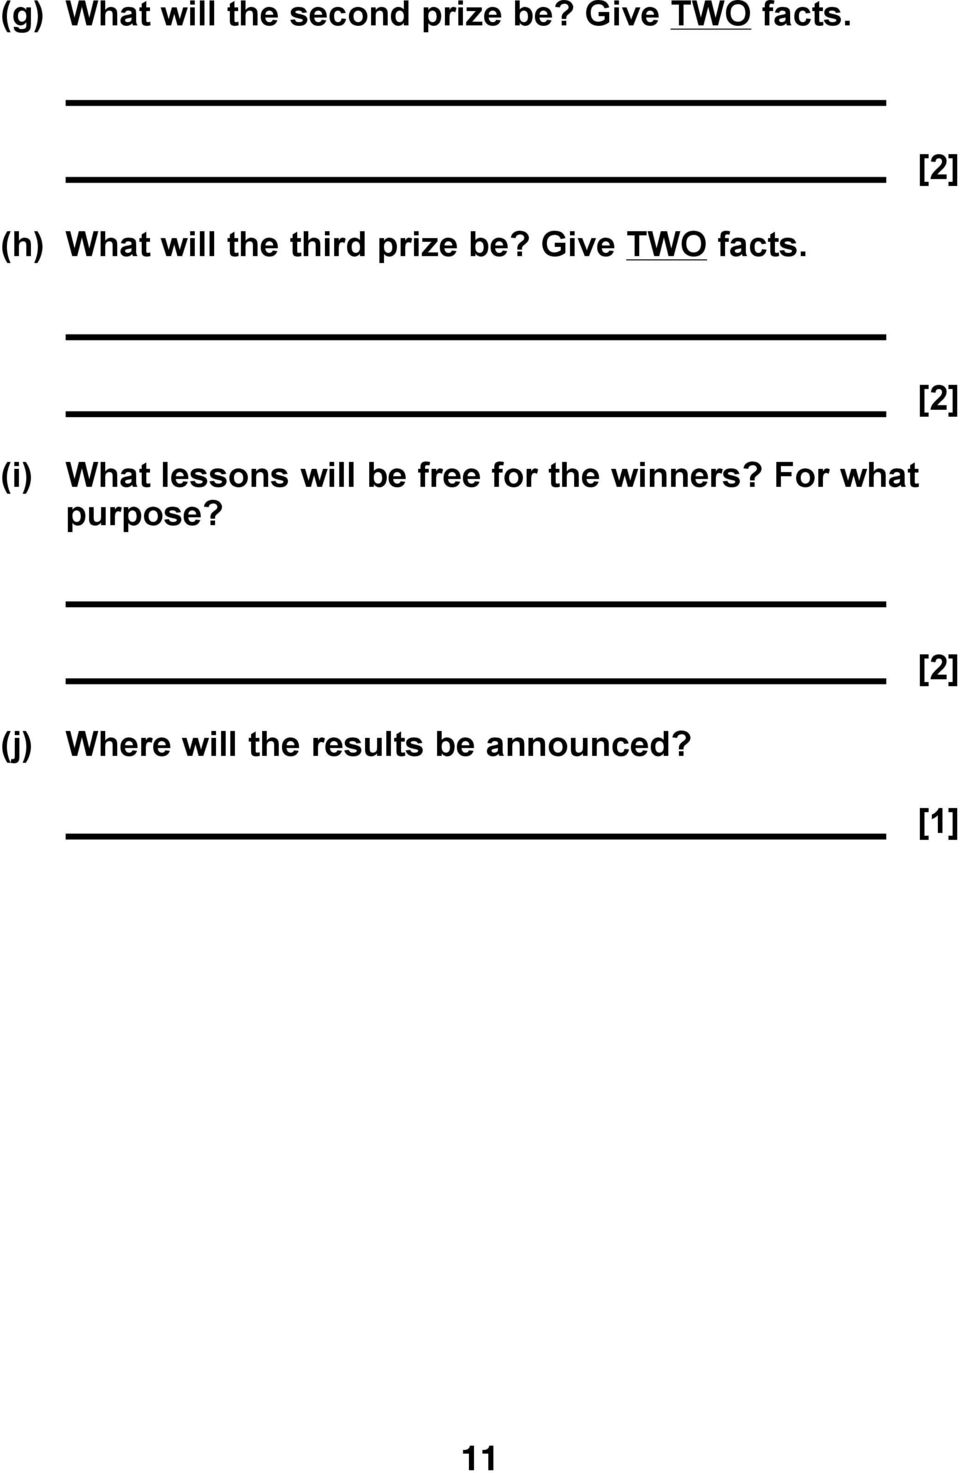 (i) What lessons will be free for the winners?